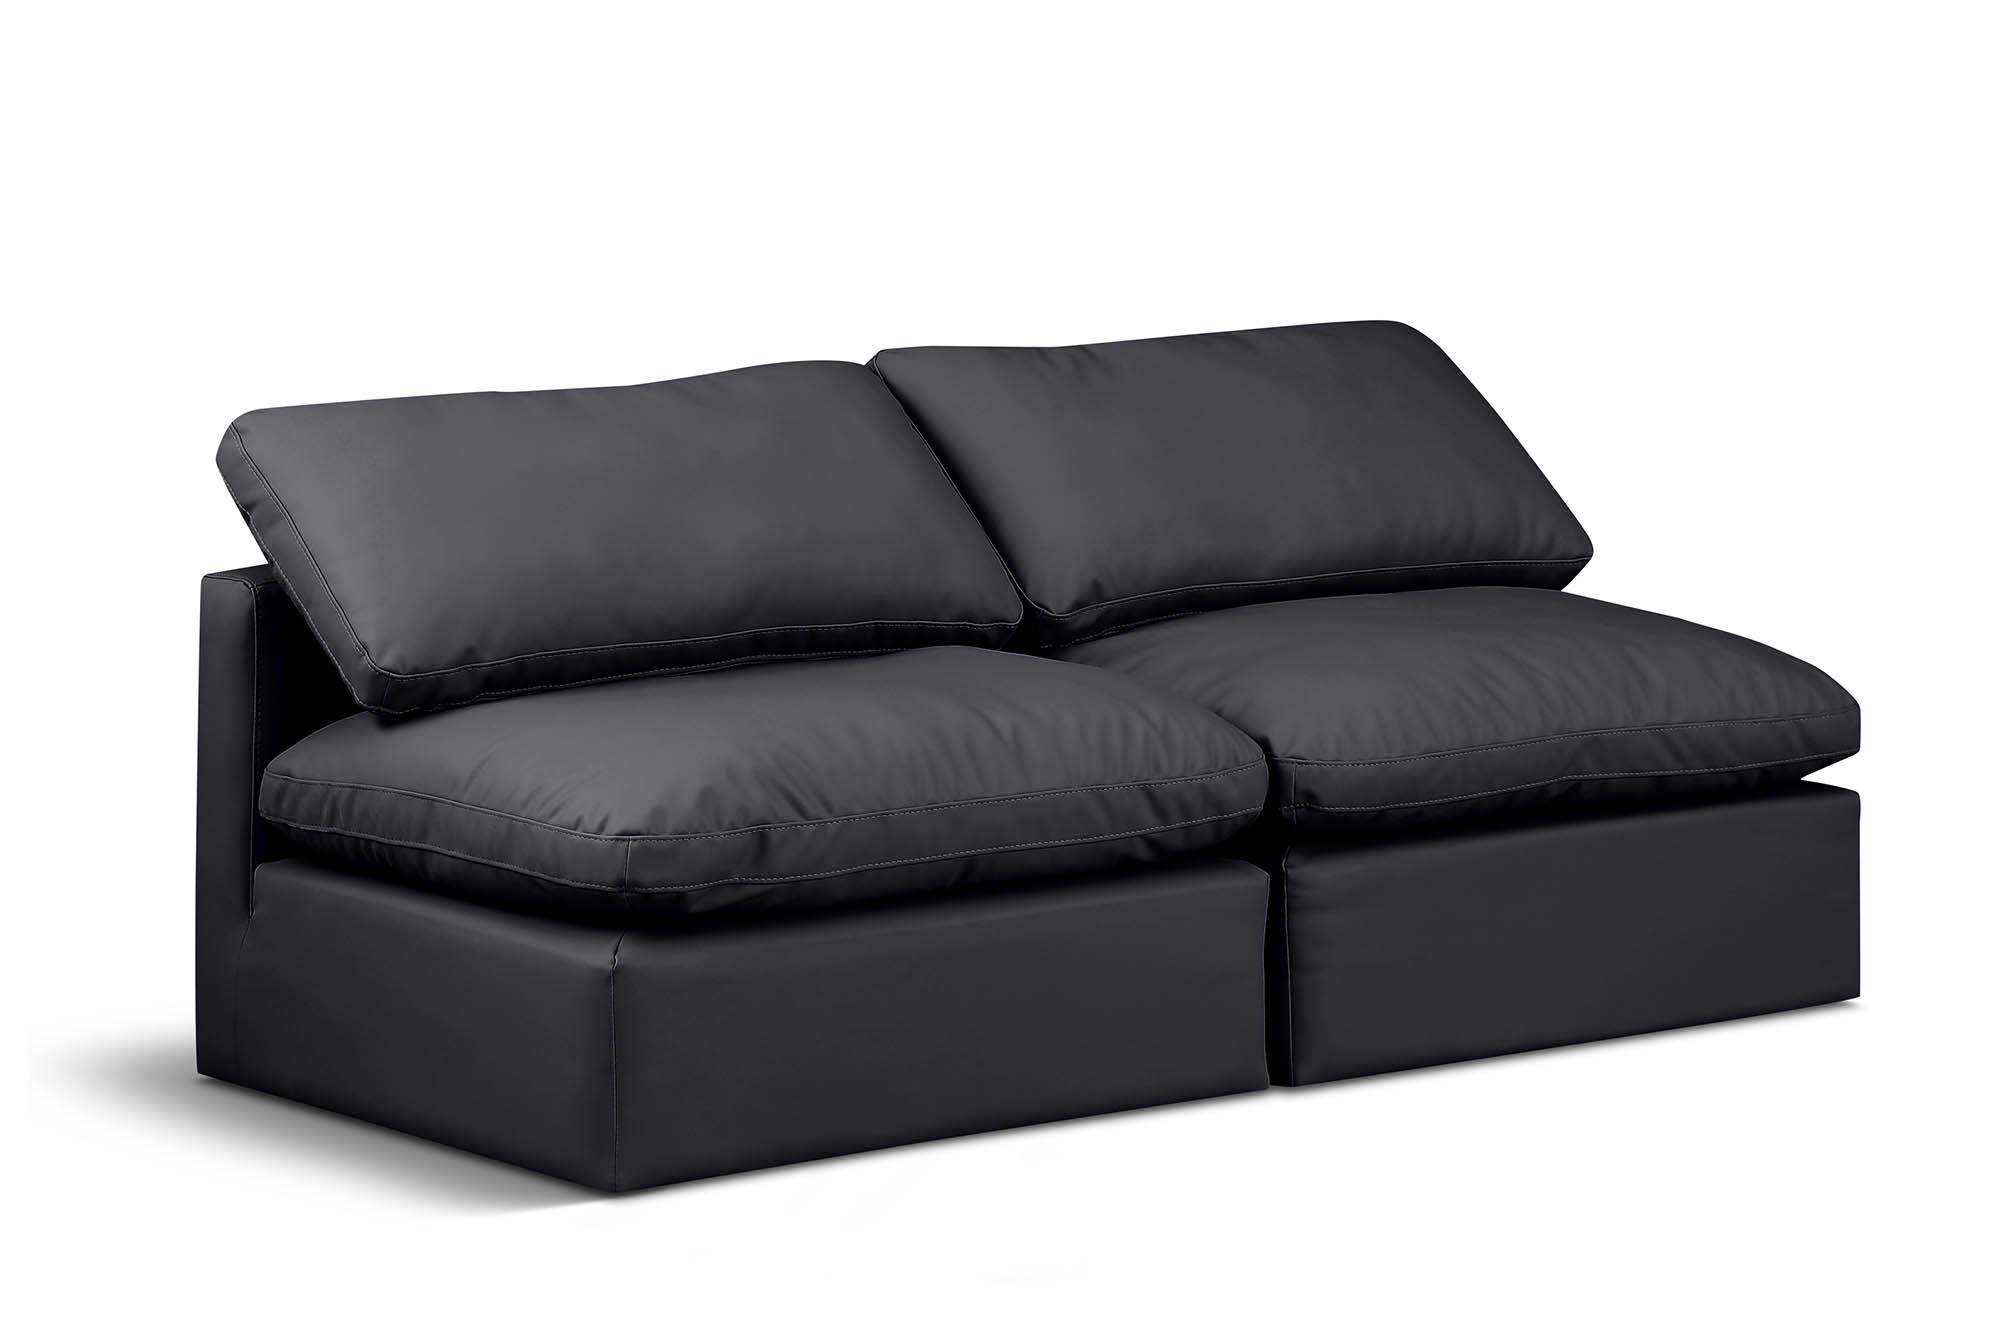 Contemporary, Modern Modular Sofa INDULGE 146Black-S2 146Black-S2 in Black Faux Leather